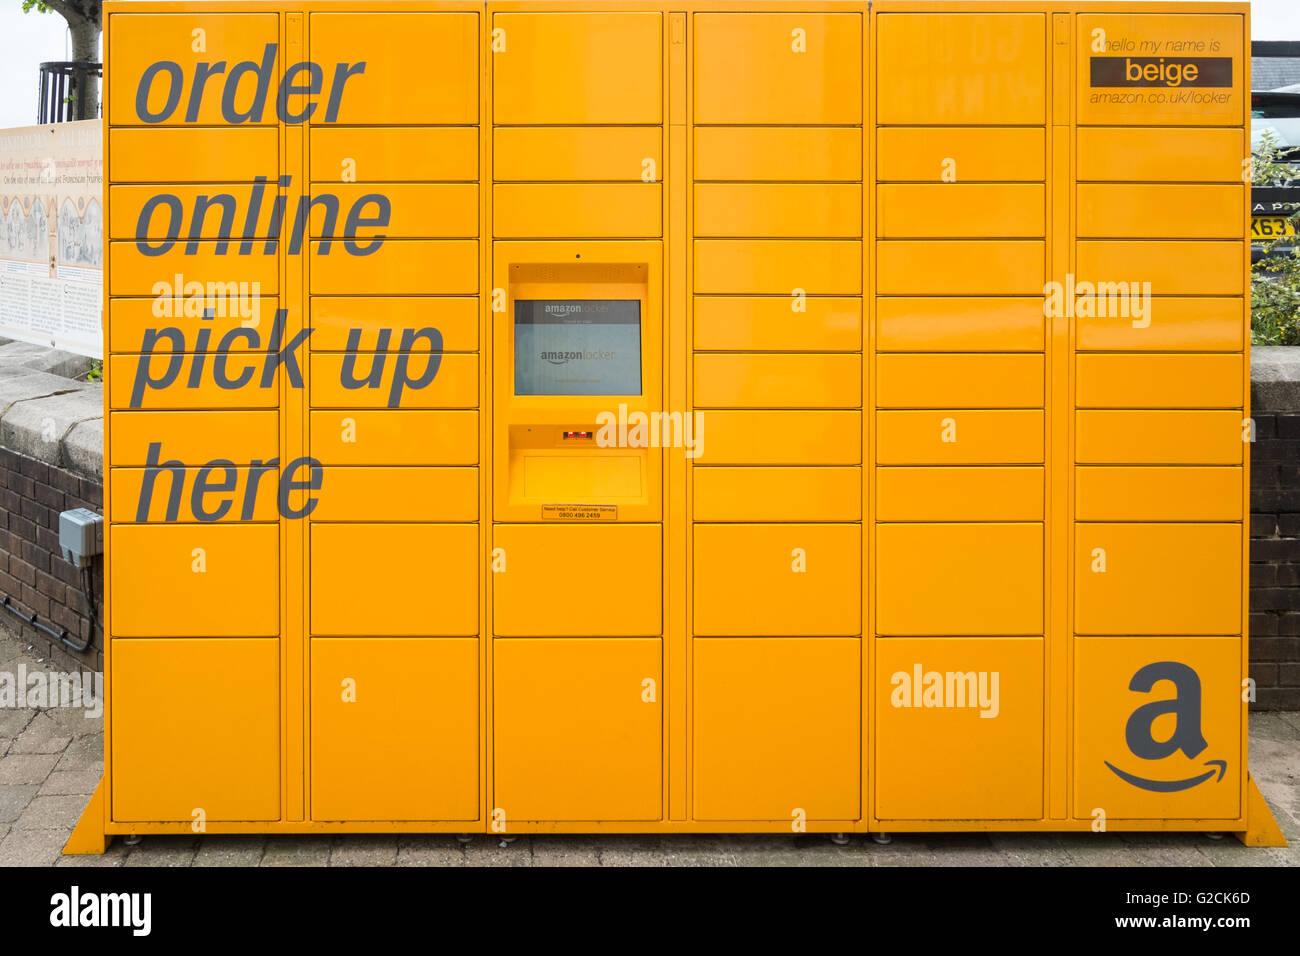 Amazon locker pick up boxes for ordering online in Carmarthen Town centre,Carmarthenshire,Wales,U.K. Stock Photo